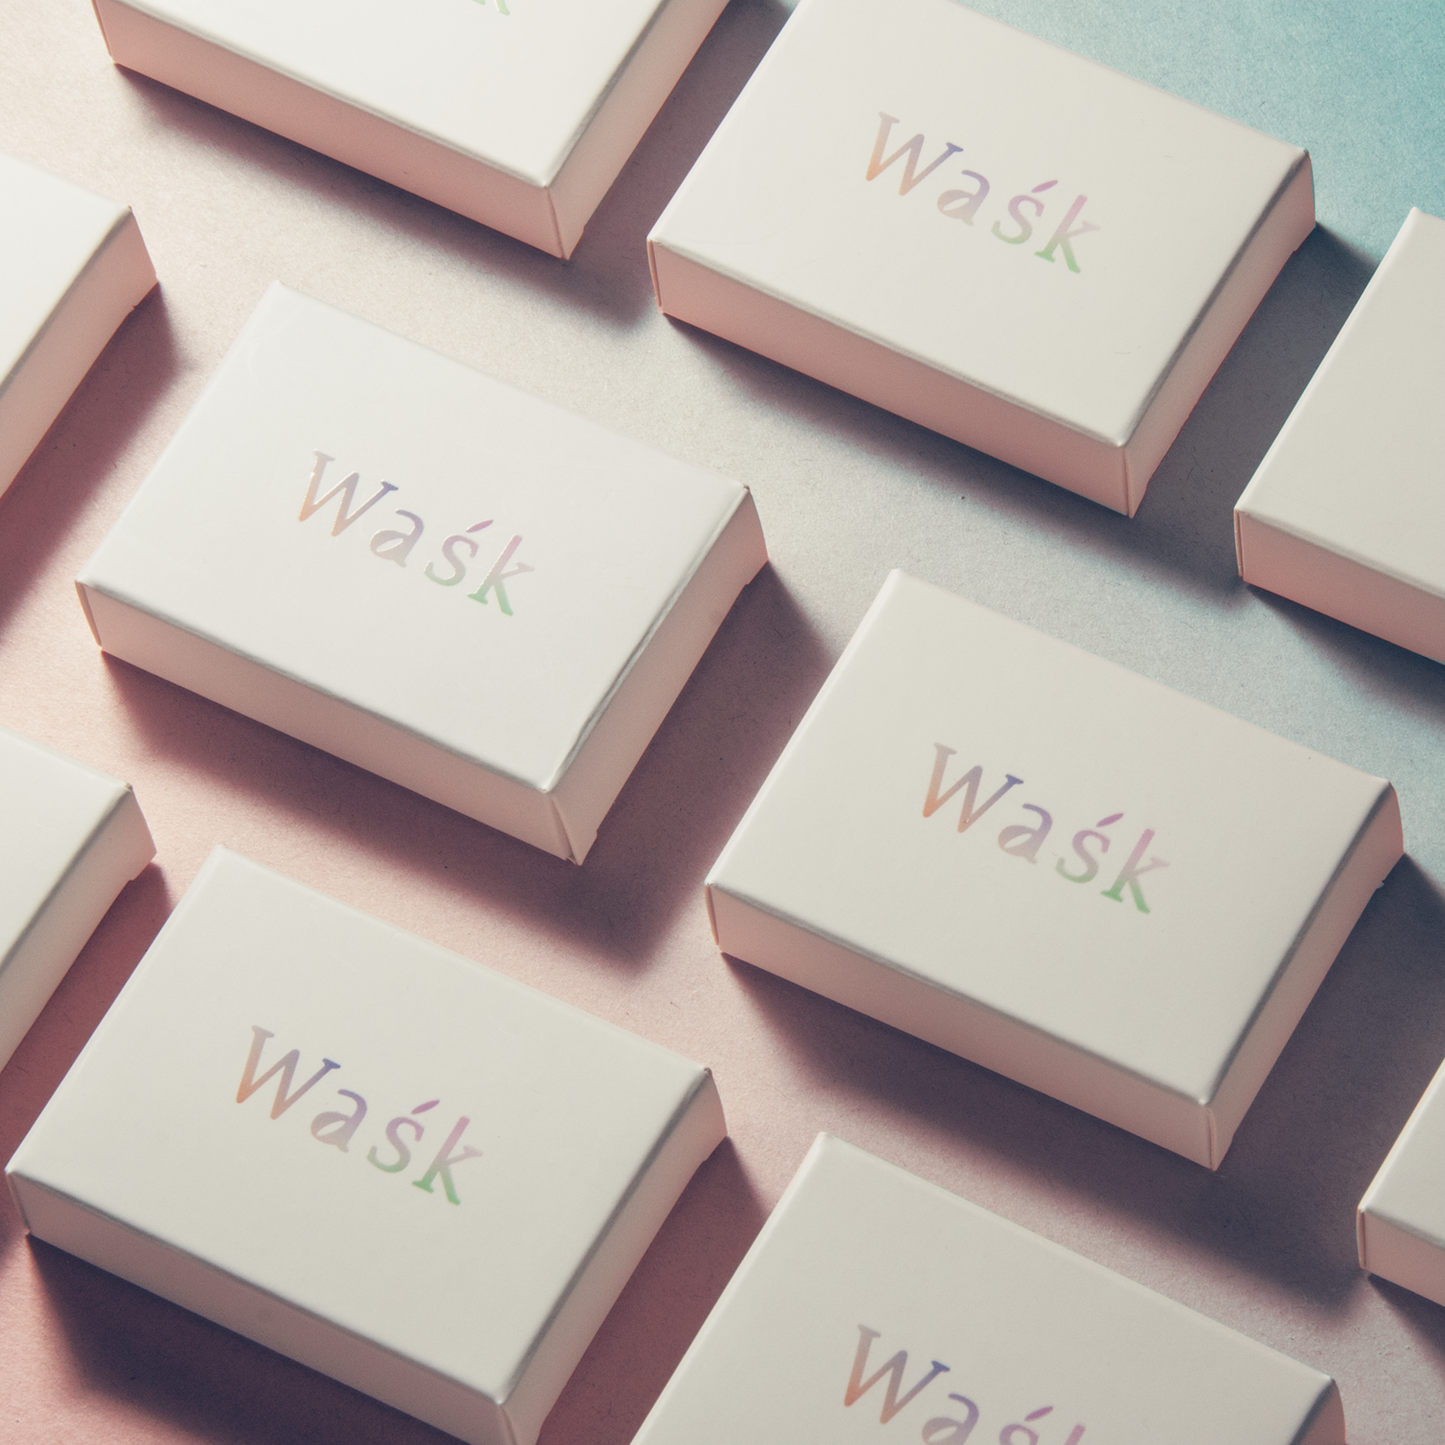 Wask Boxes